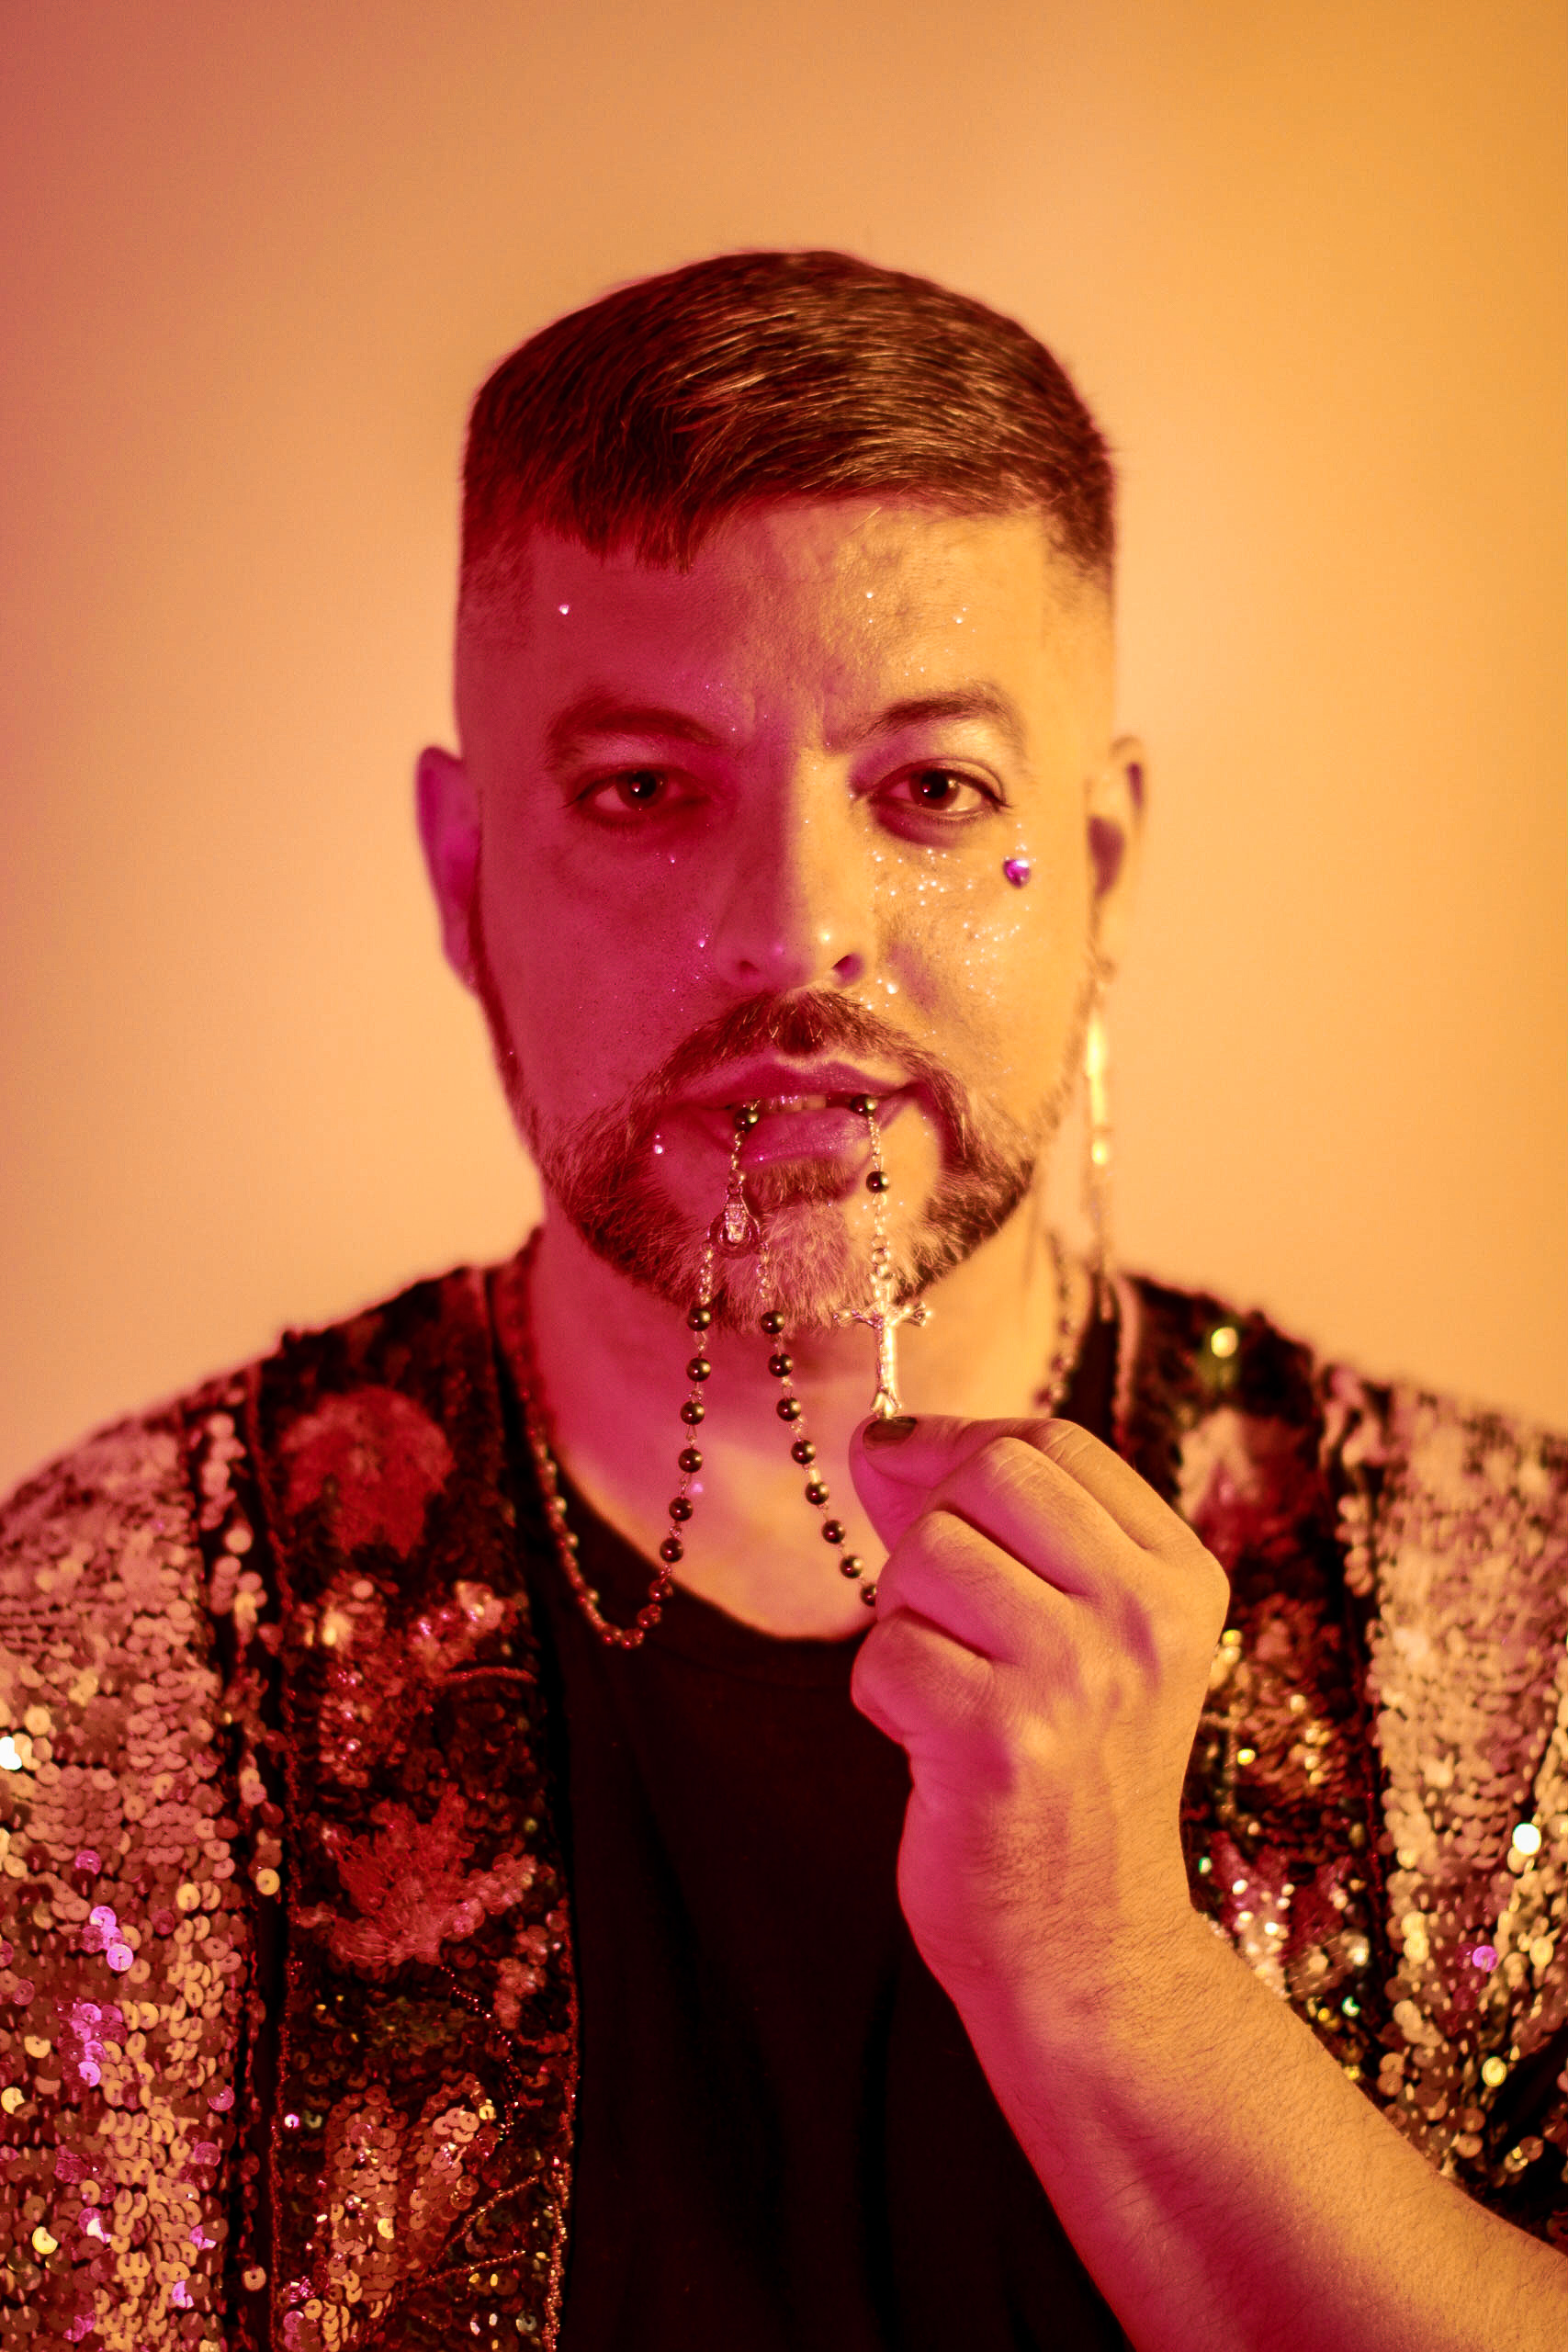 A cis, Latinx man with short dark hair and a goatee beard fingers the cross on a rosary, suspended from his mouth. He is wearing a sequined jacket over a black shirt, and photographed against a glowing orange background.